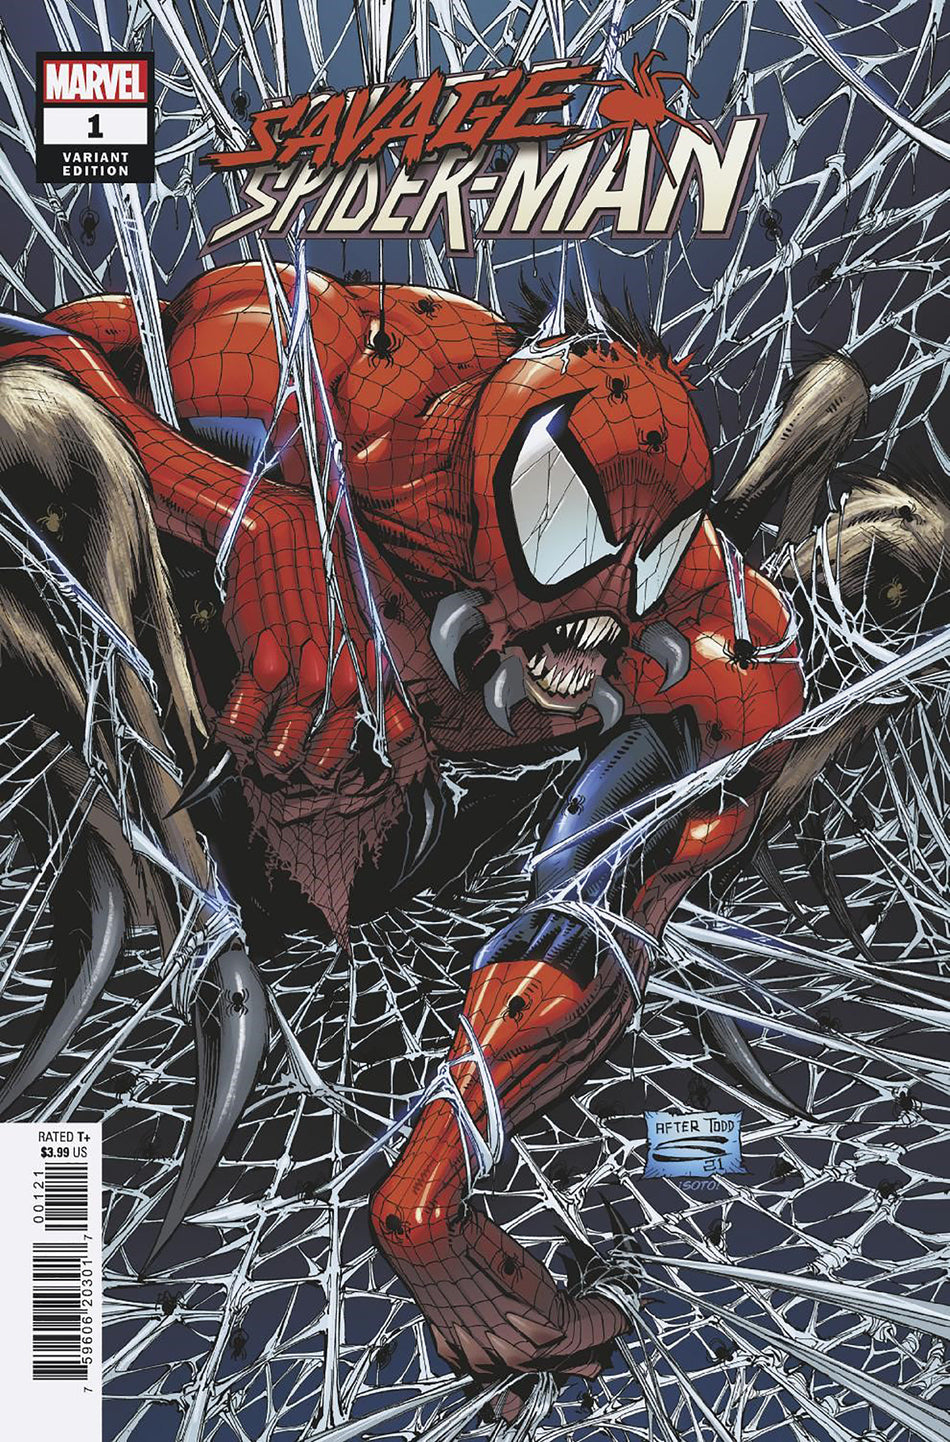 Image of Savage Spider-Man 1 Sandoval Variant comic sold by Stronghold Collectibles.